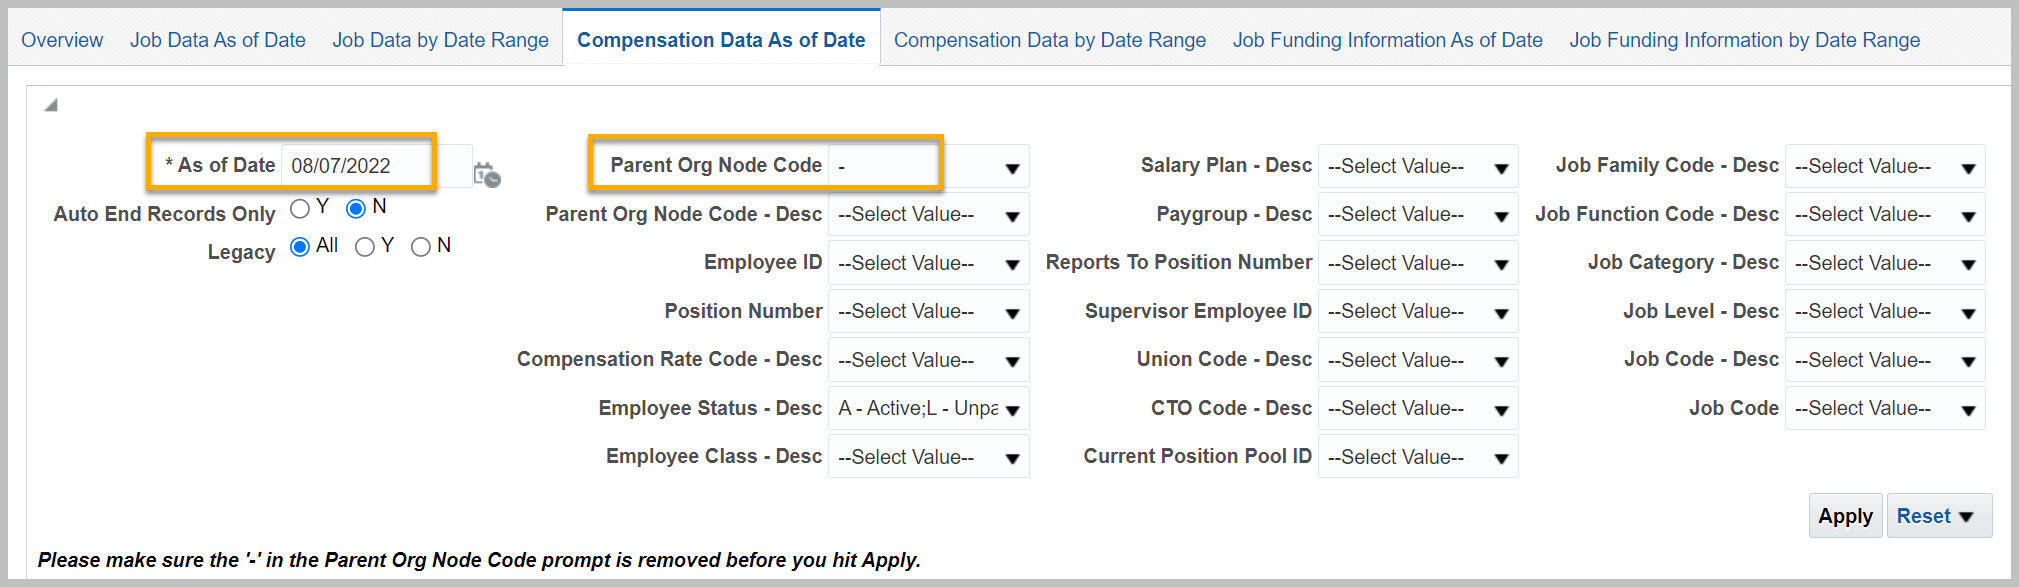 Filters for Workforce Detail, Compensation Data As of Date